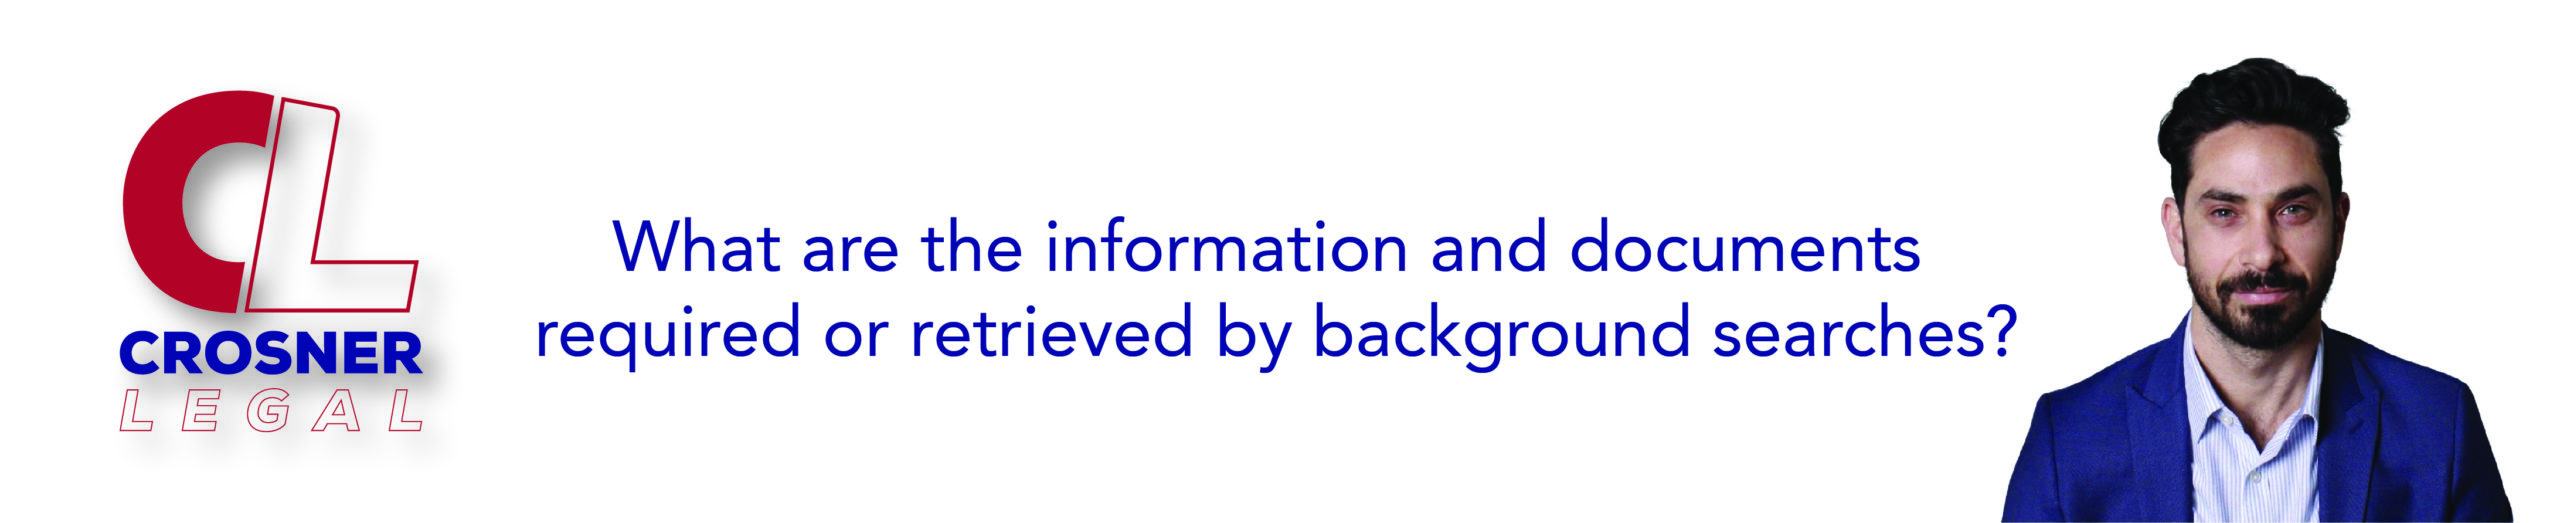 What are the information and documents required or retrieved by background searches?